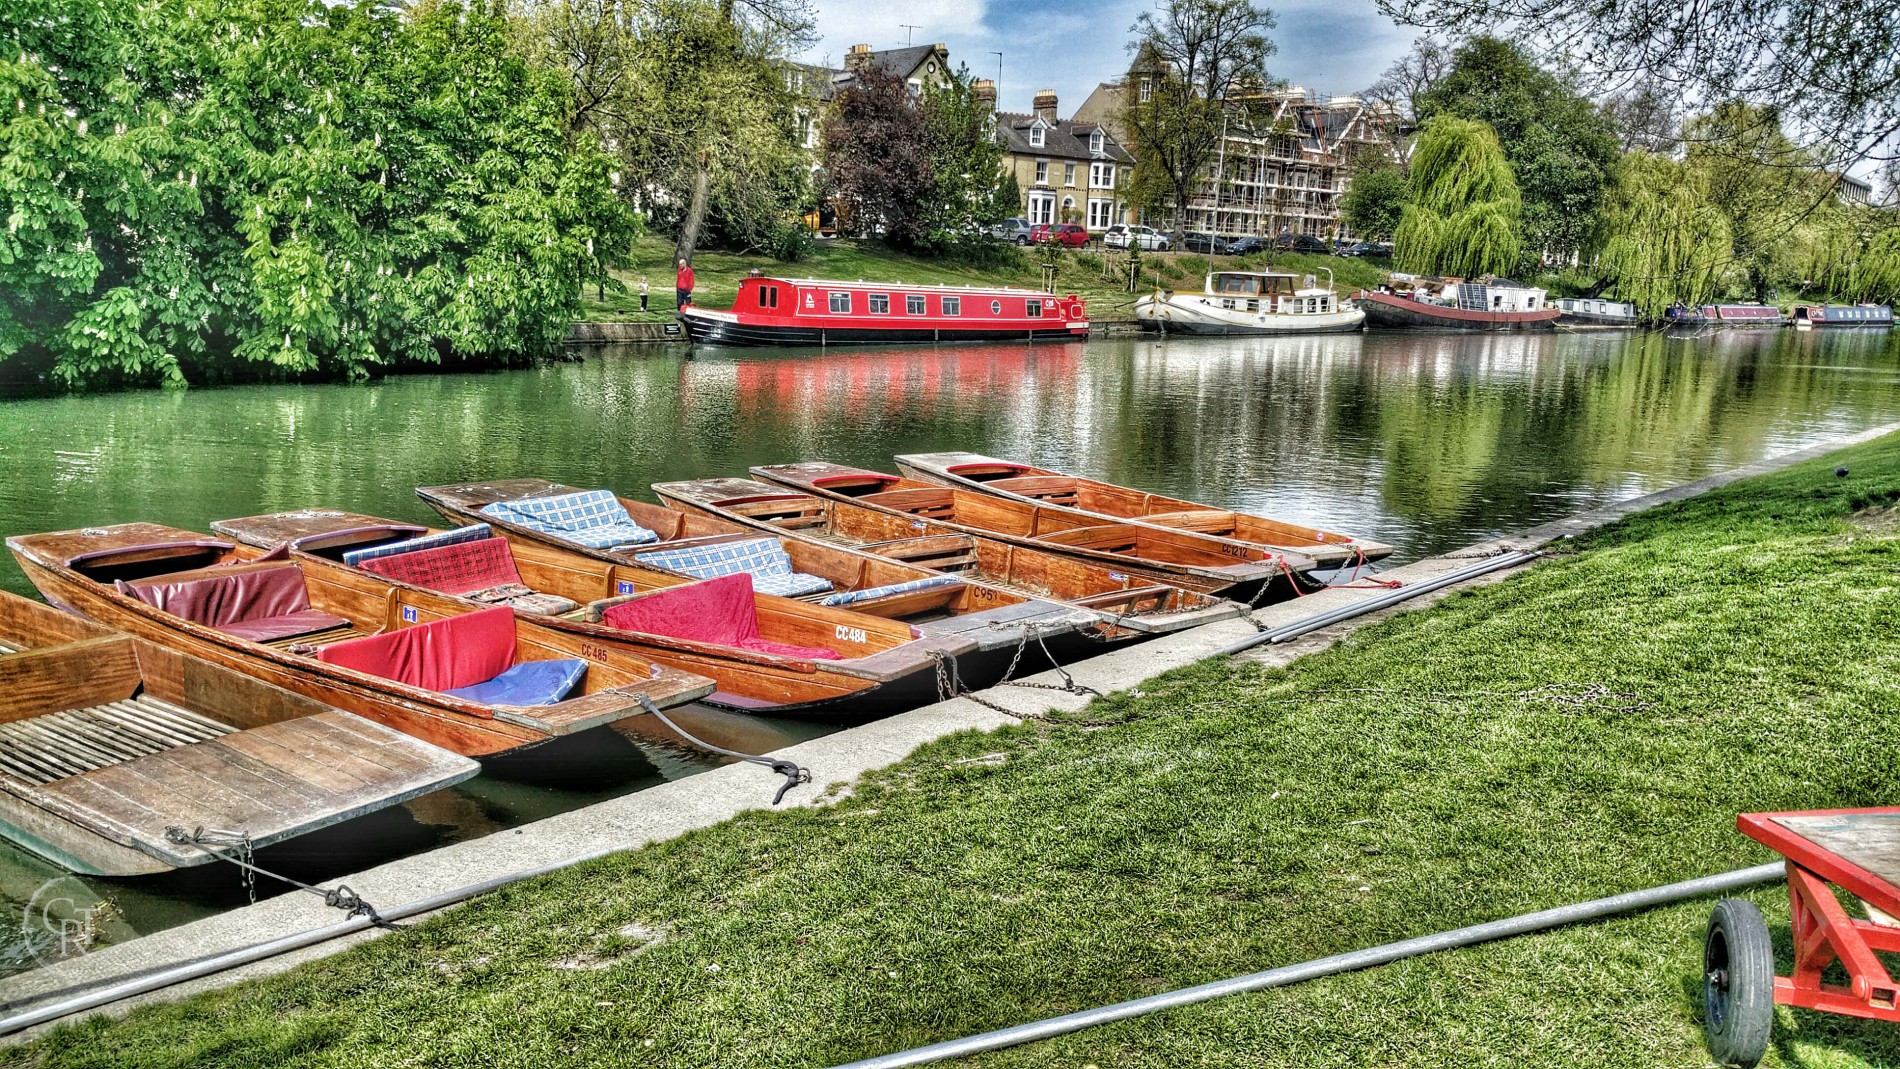 Punts from La Mimosa punt station, moored on Jesus Green